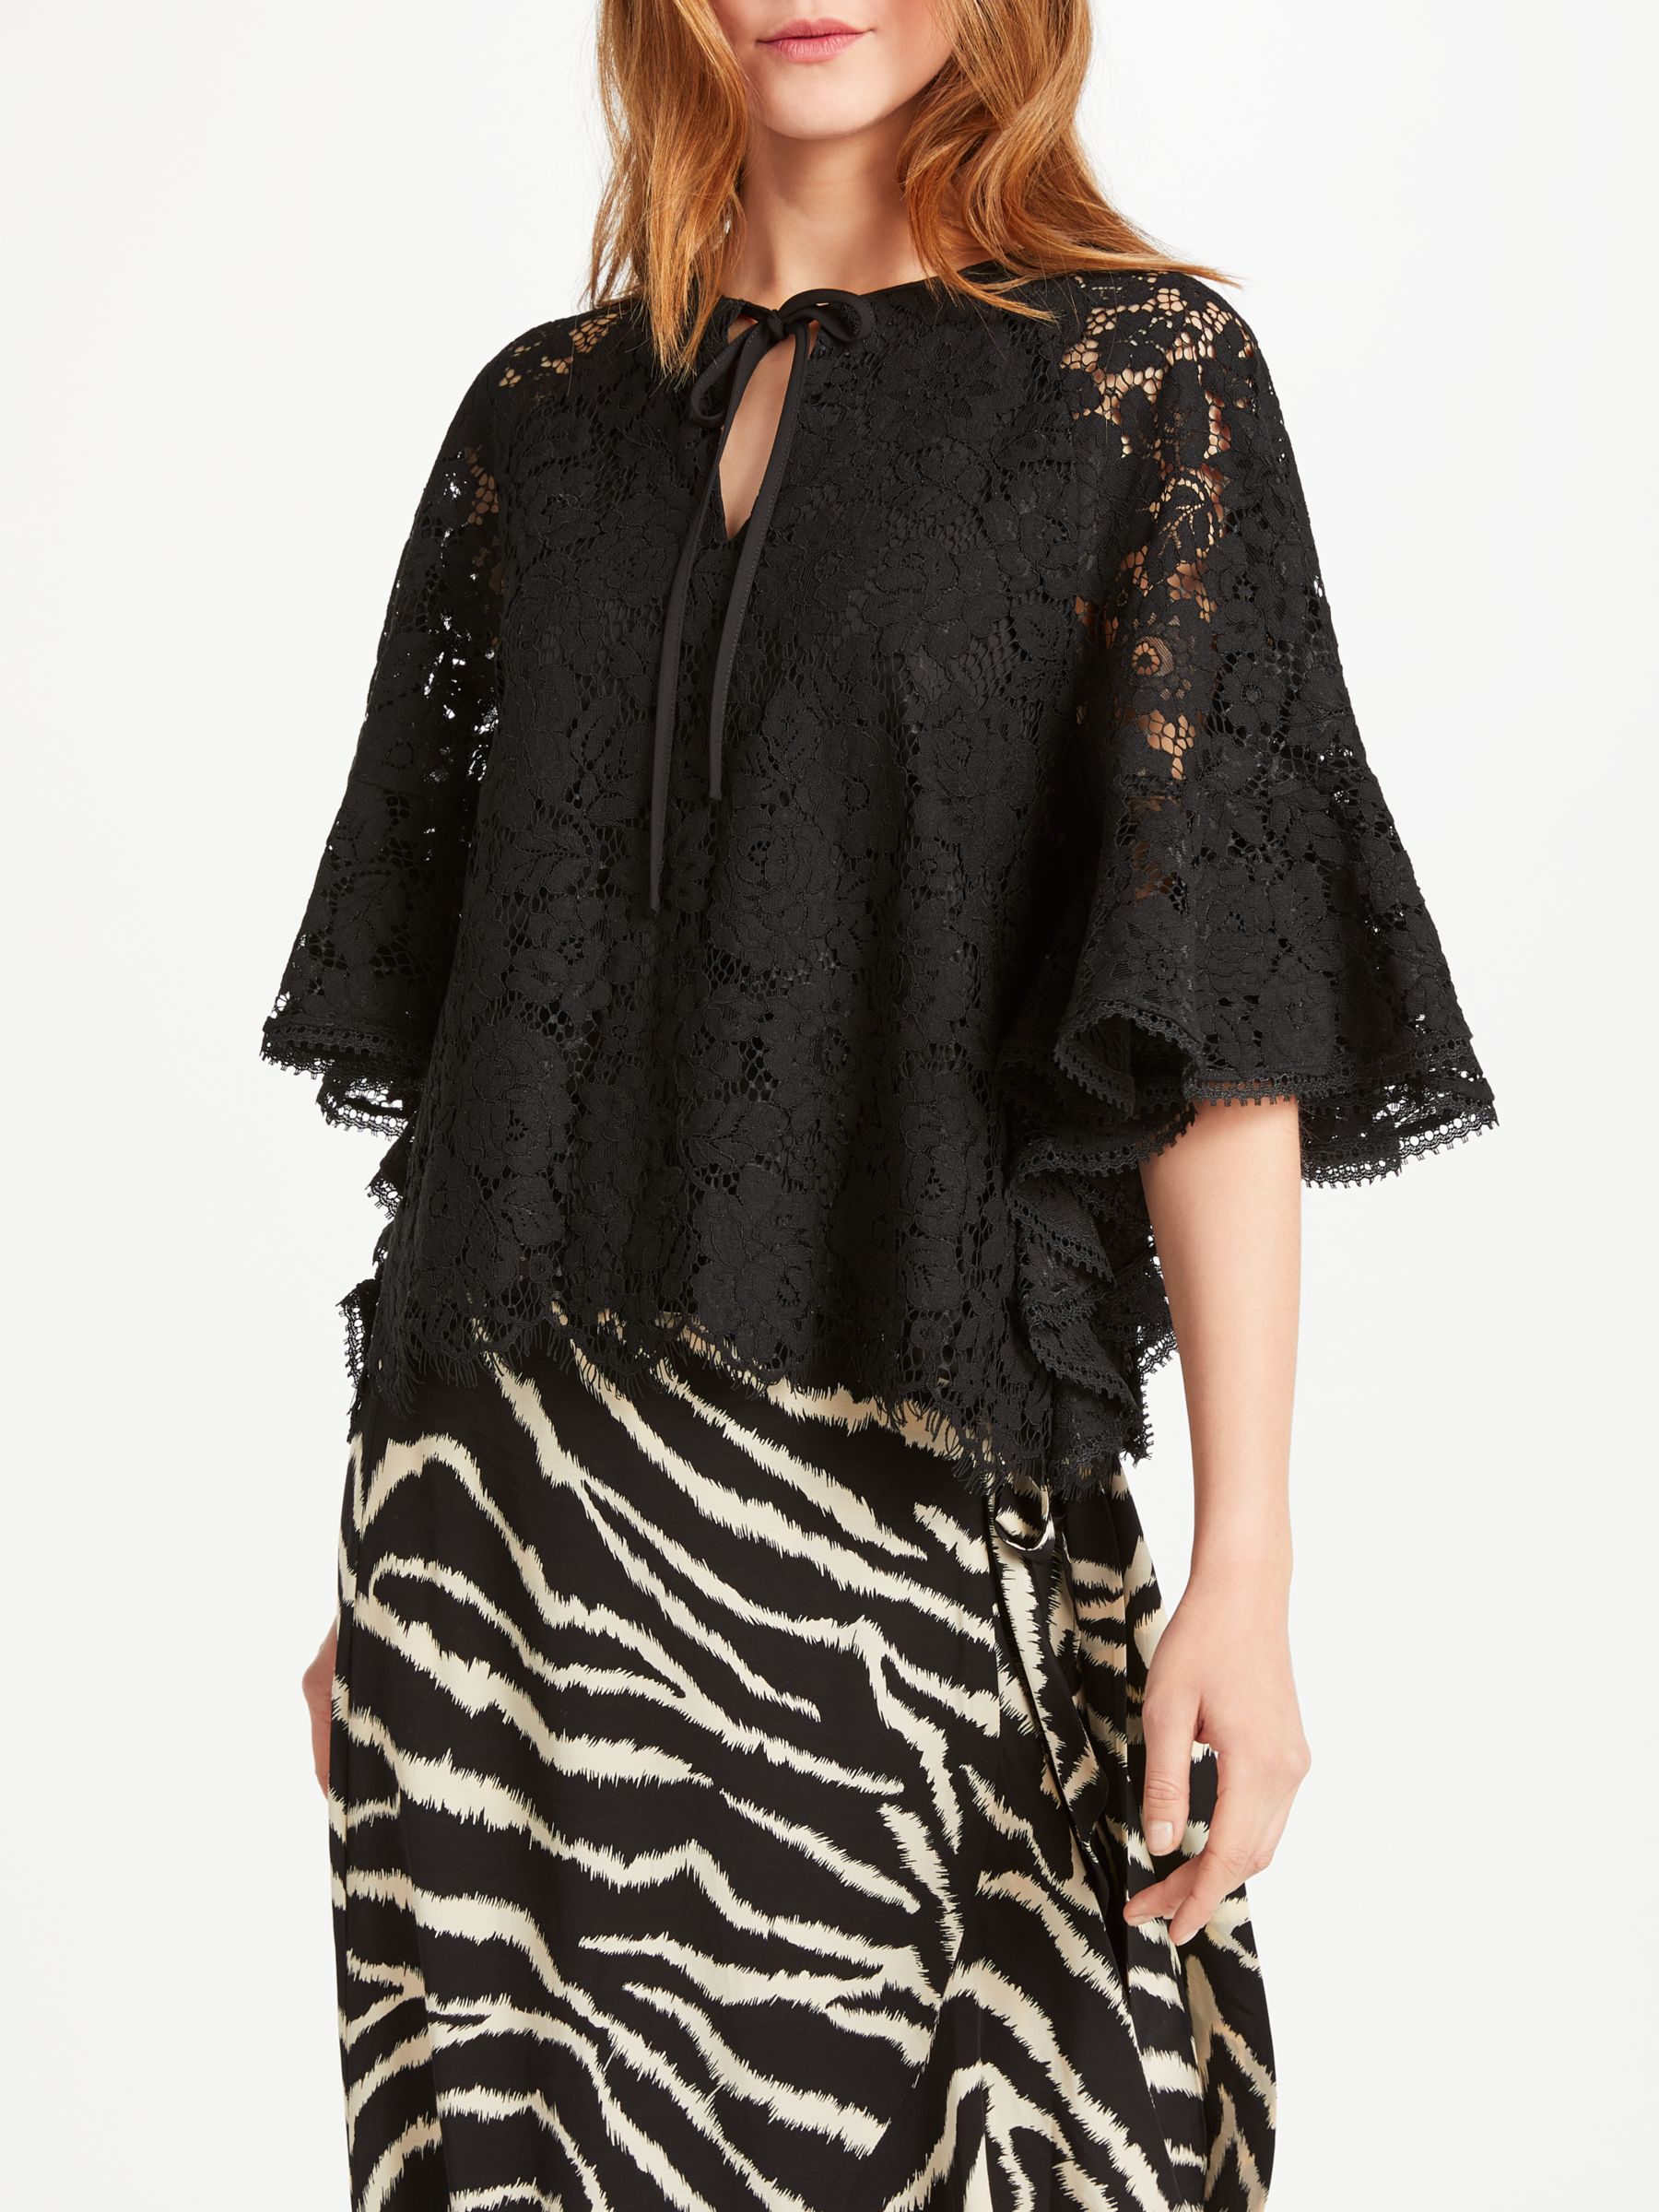 Somerset by Alice Temperley Tie Neck Lace Top